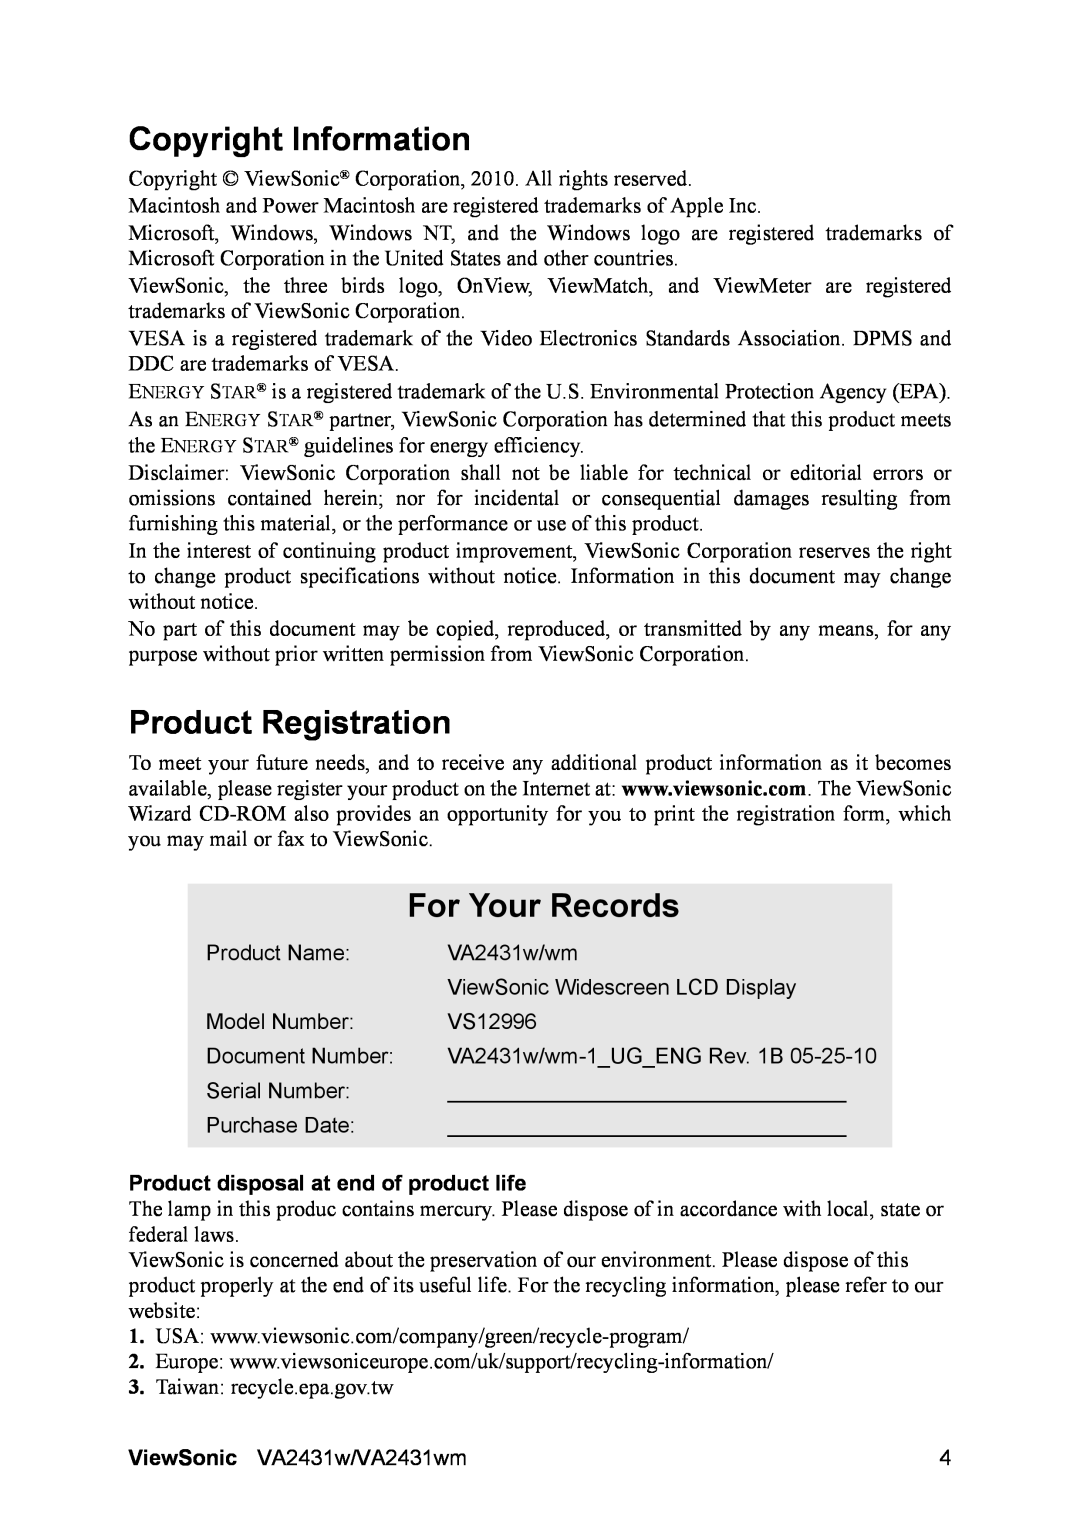 ViewSonic VS12996 Copyright Information, Product Registration, For Your Records, Product disposal at end of product life 